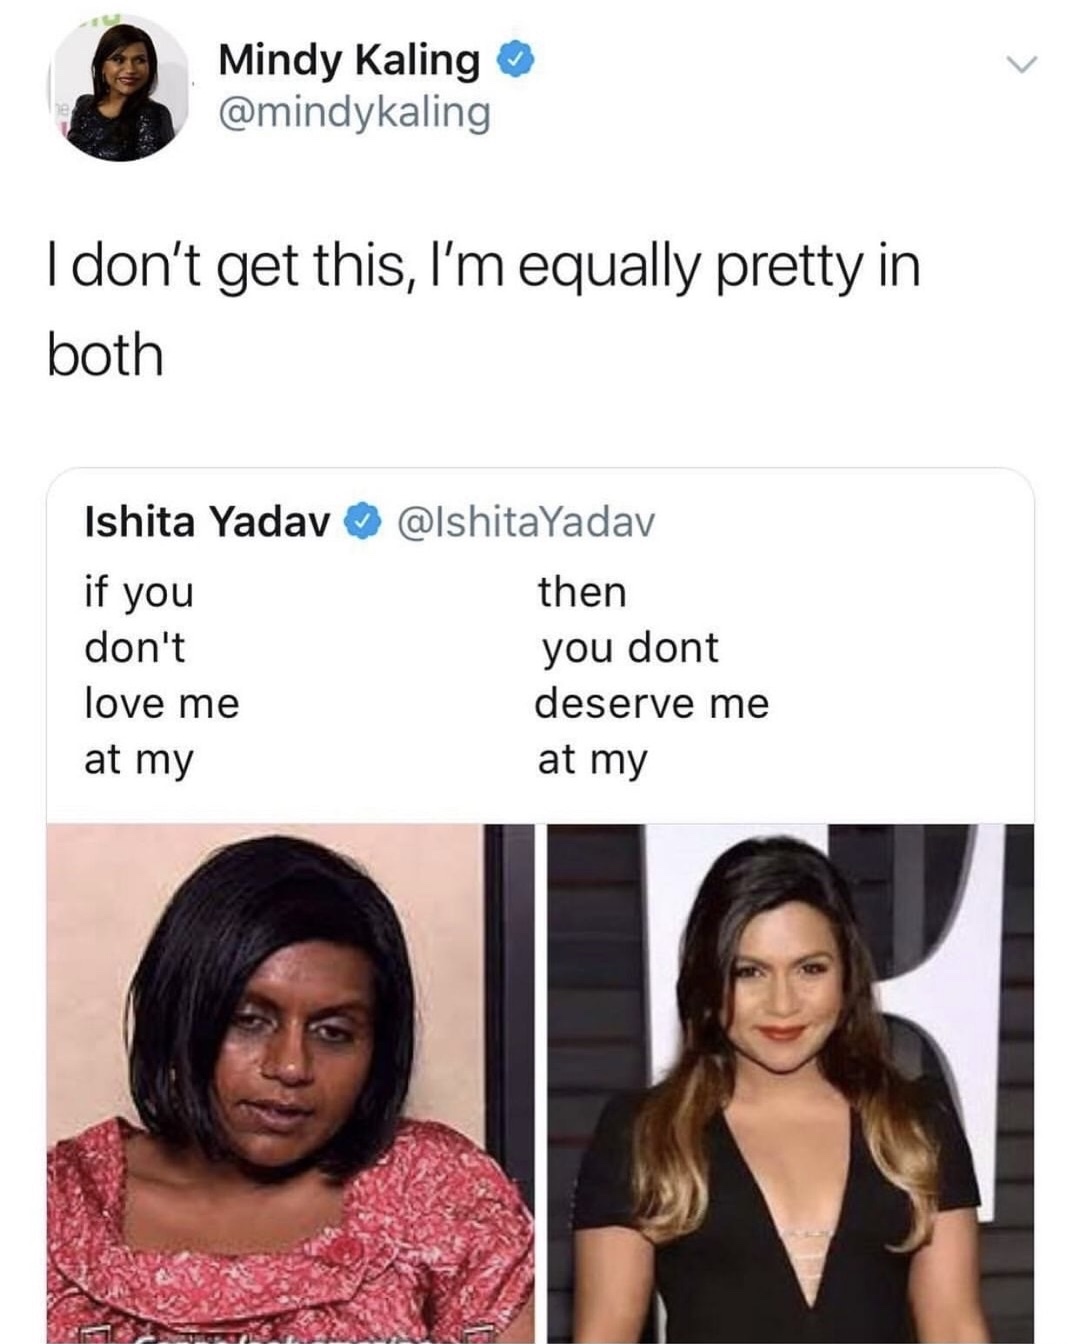 mindy project meme - Mindy Kaling I don't get this, I'm equally pretty in both Ishita Yadav if you don't love me at my Yadav then you dont deserve me at my